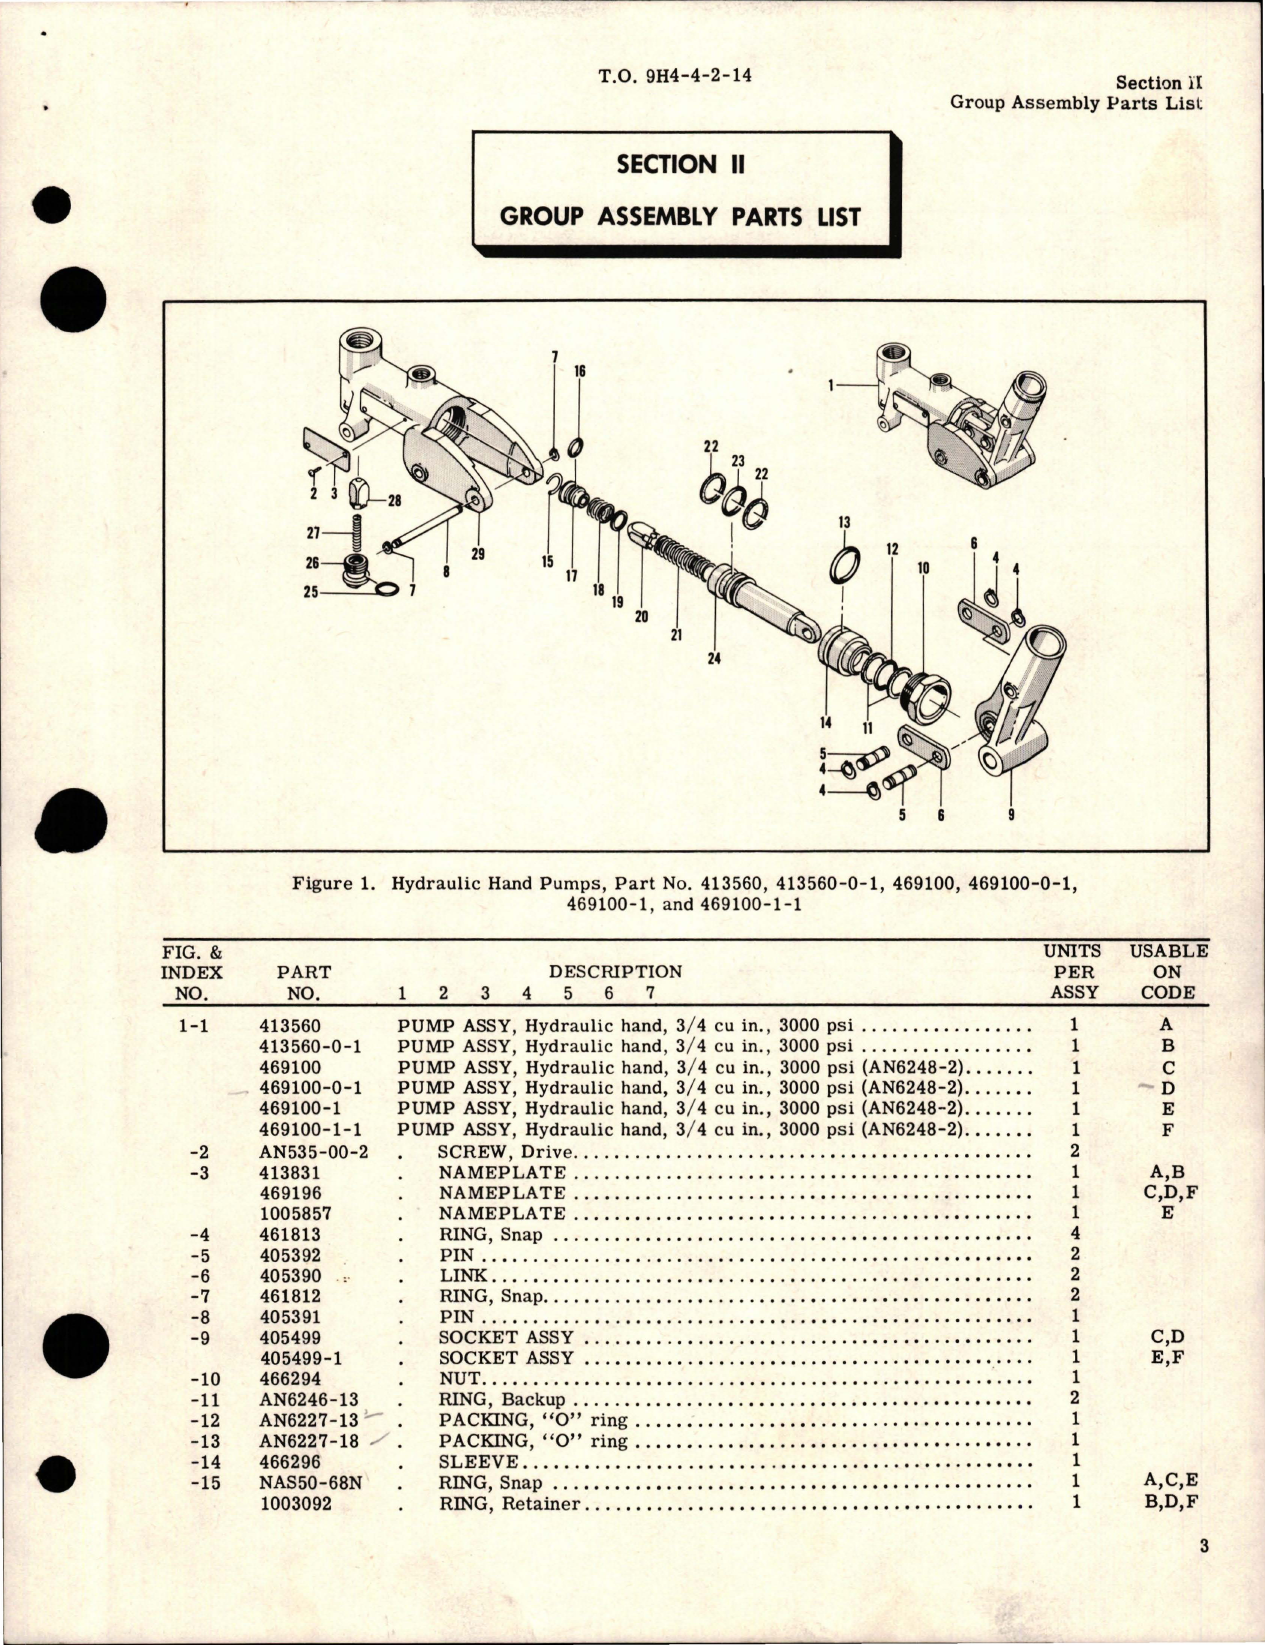 Sample page 5 from AirCorps Library document: Illustrated Parts Breakdown for Hydraulic Hand Pumps